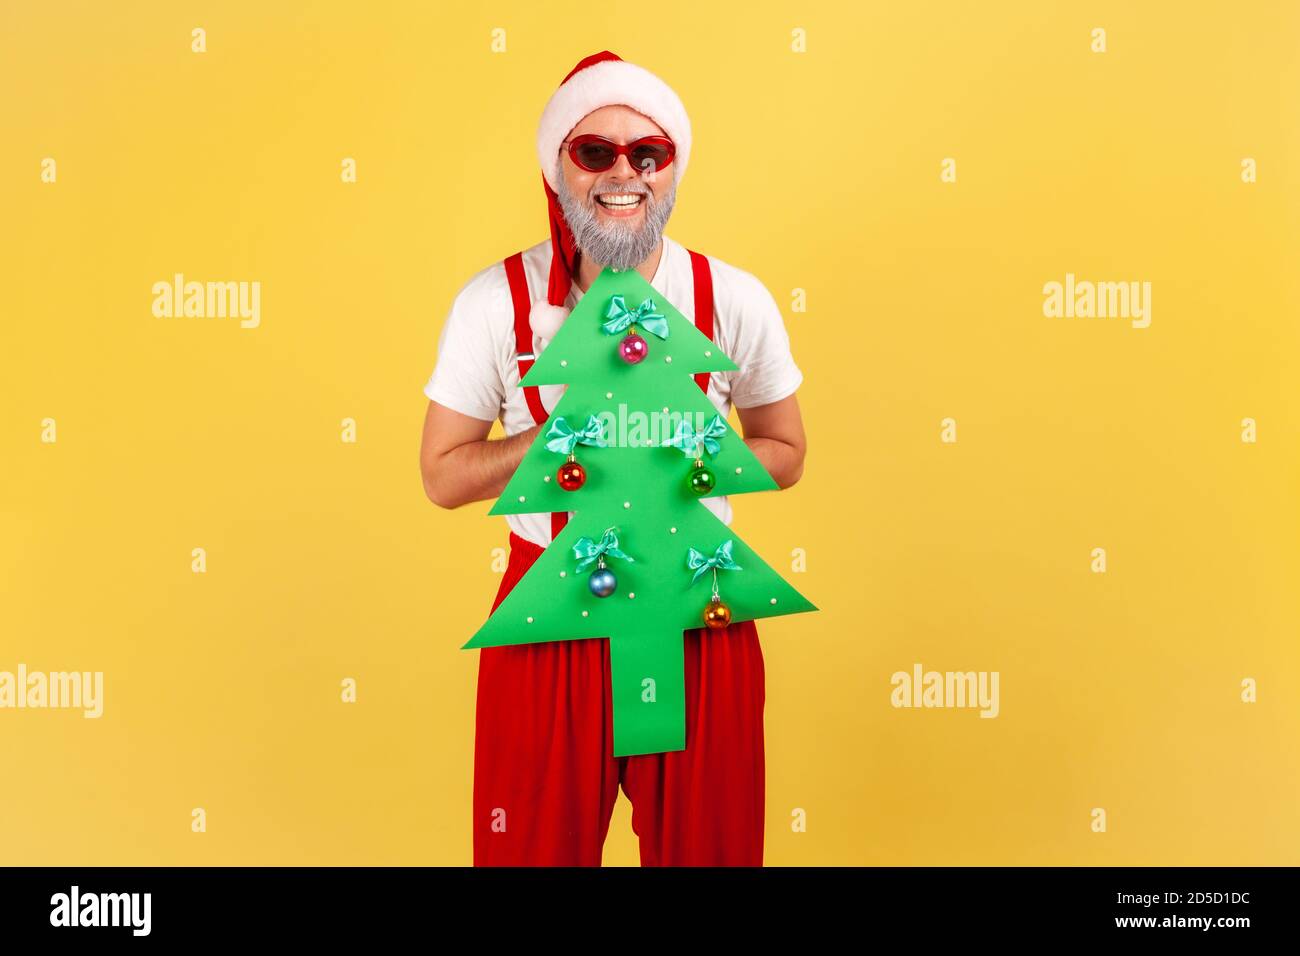 Extremely happy elderly man in santa claus costume and stylish sunglasses holding paper christmas tree looking at camera with toothy smile. Indoor stu Stock Photo